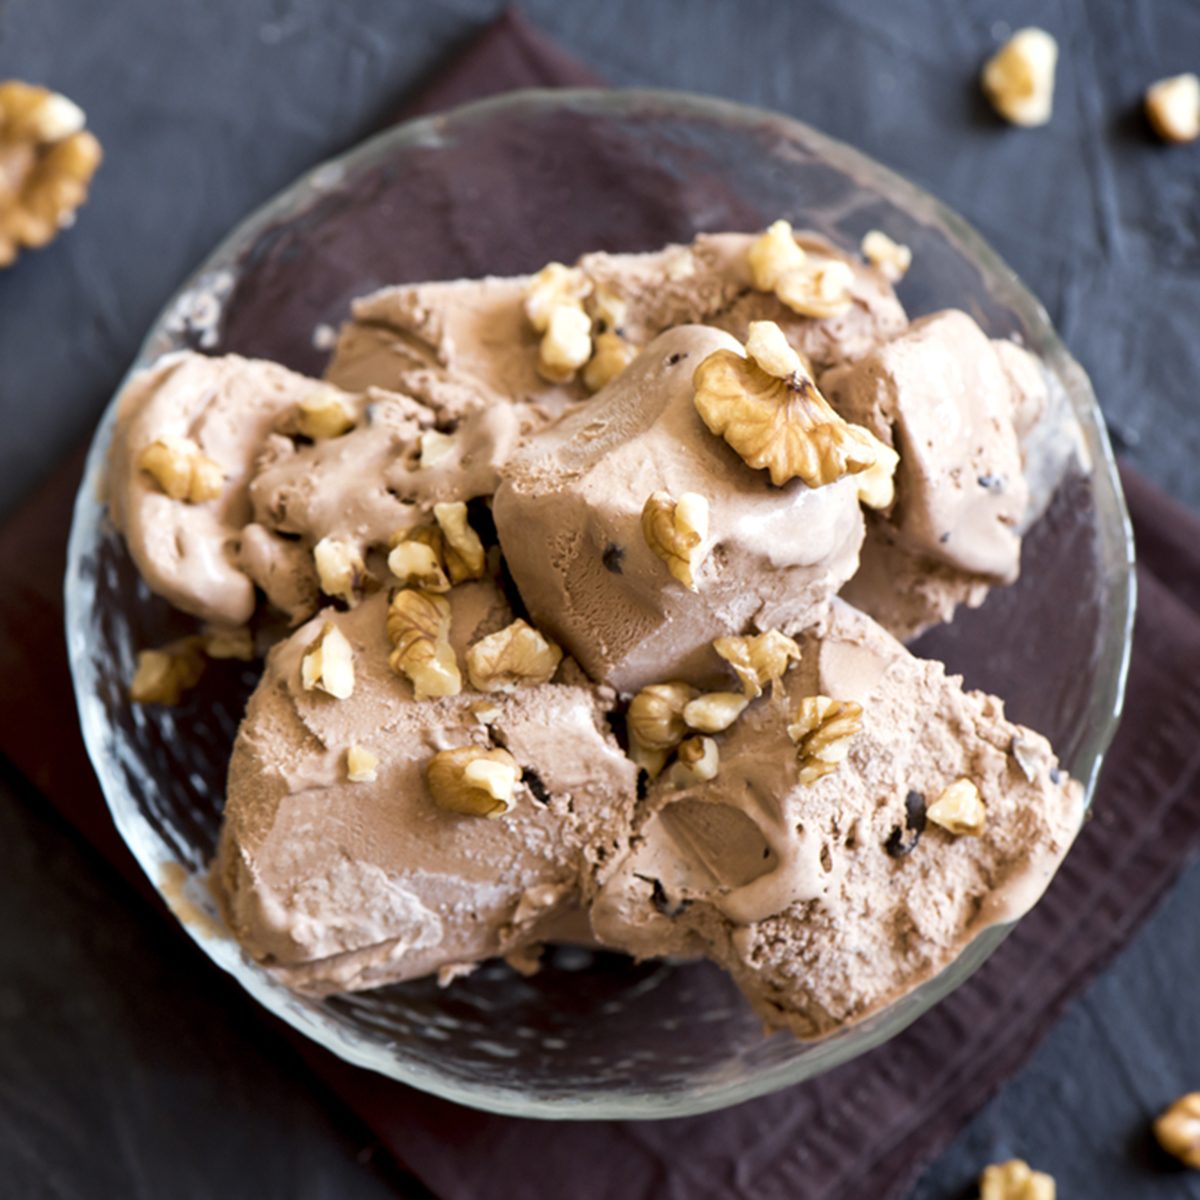 Homemade chocolate ice cream topped with walnuts in glass bowl - healthy homemade dairy free, gluten free, vegan dessert; Shutterstock ID 573399205; Job (TFH, TOH, RD, BNB, CWM, CM): Taste of Home